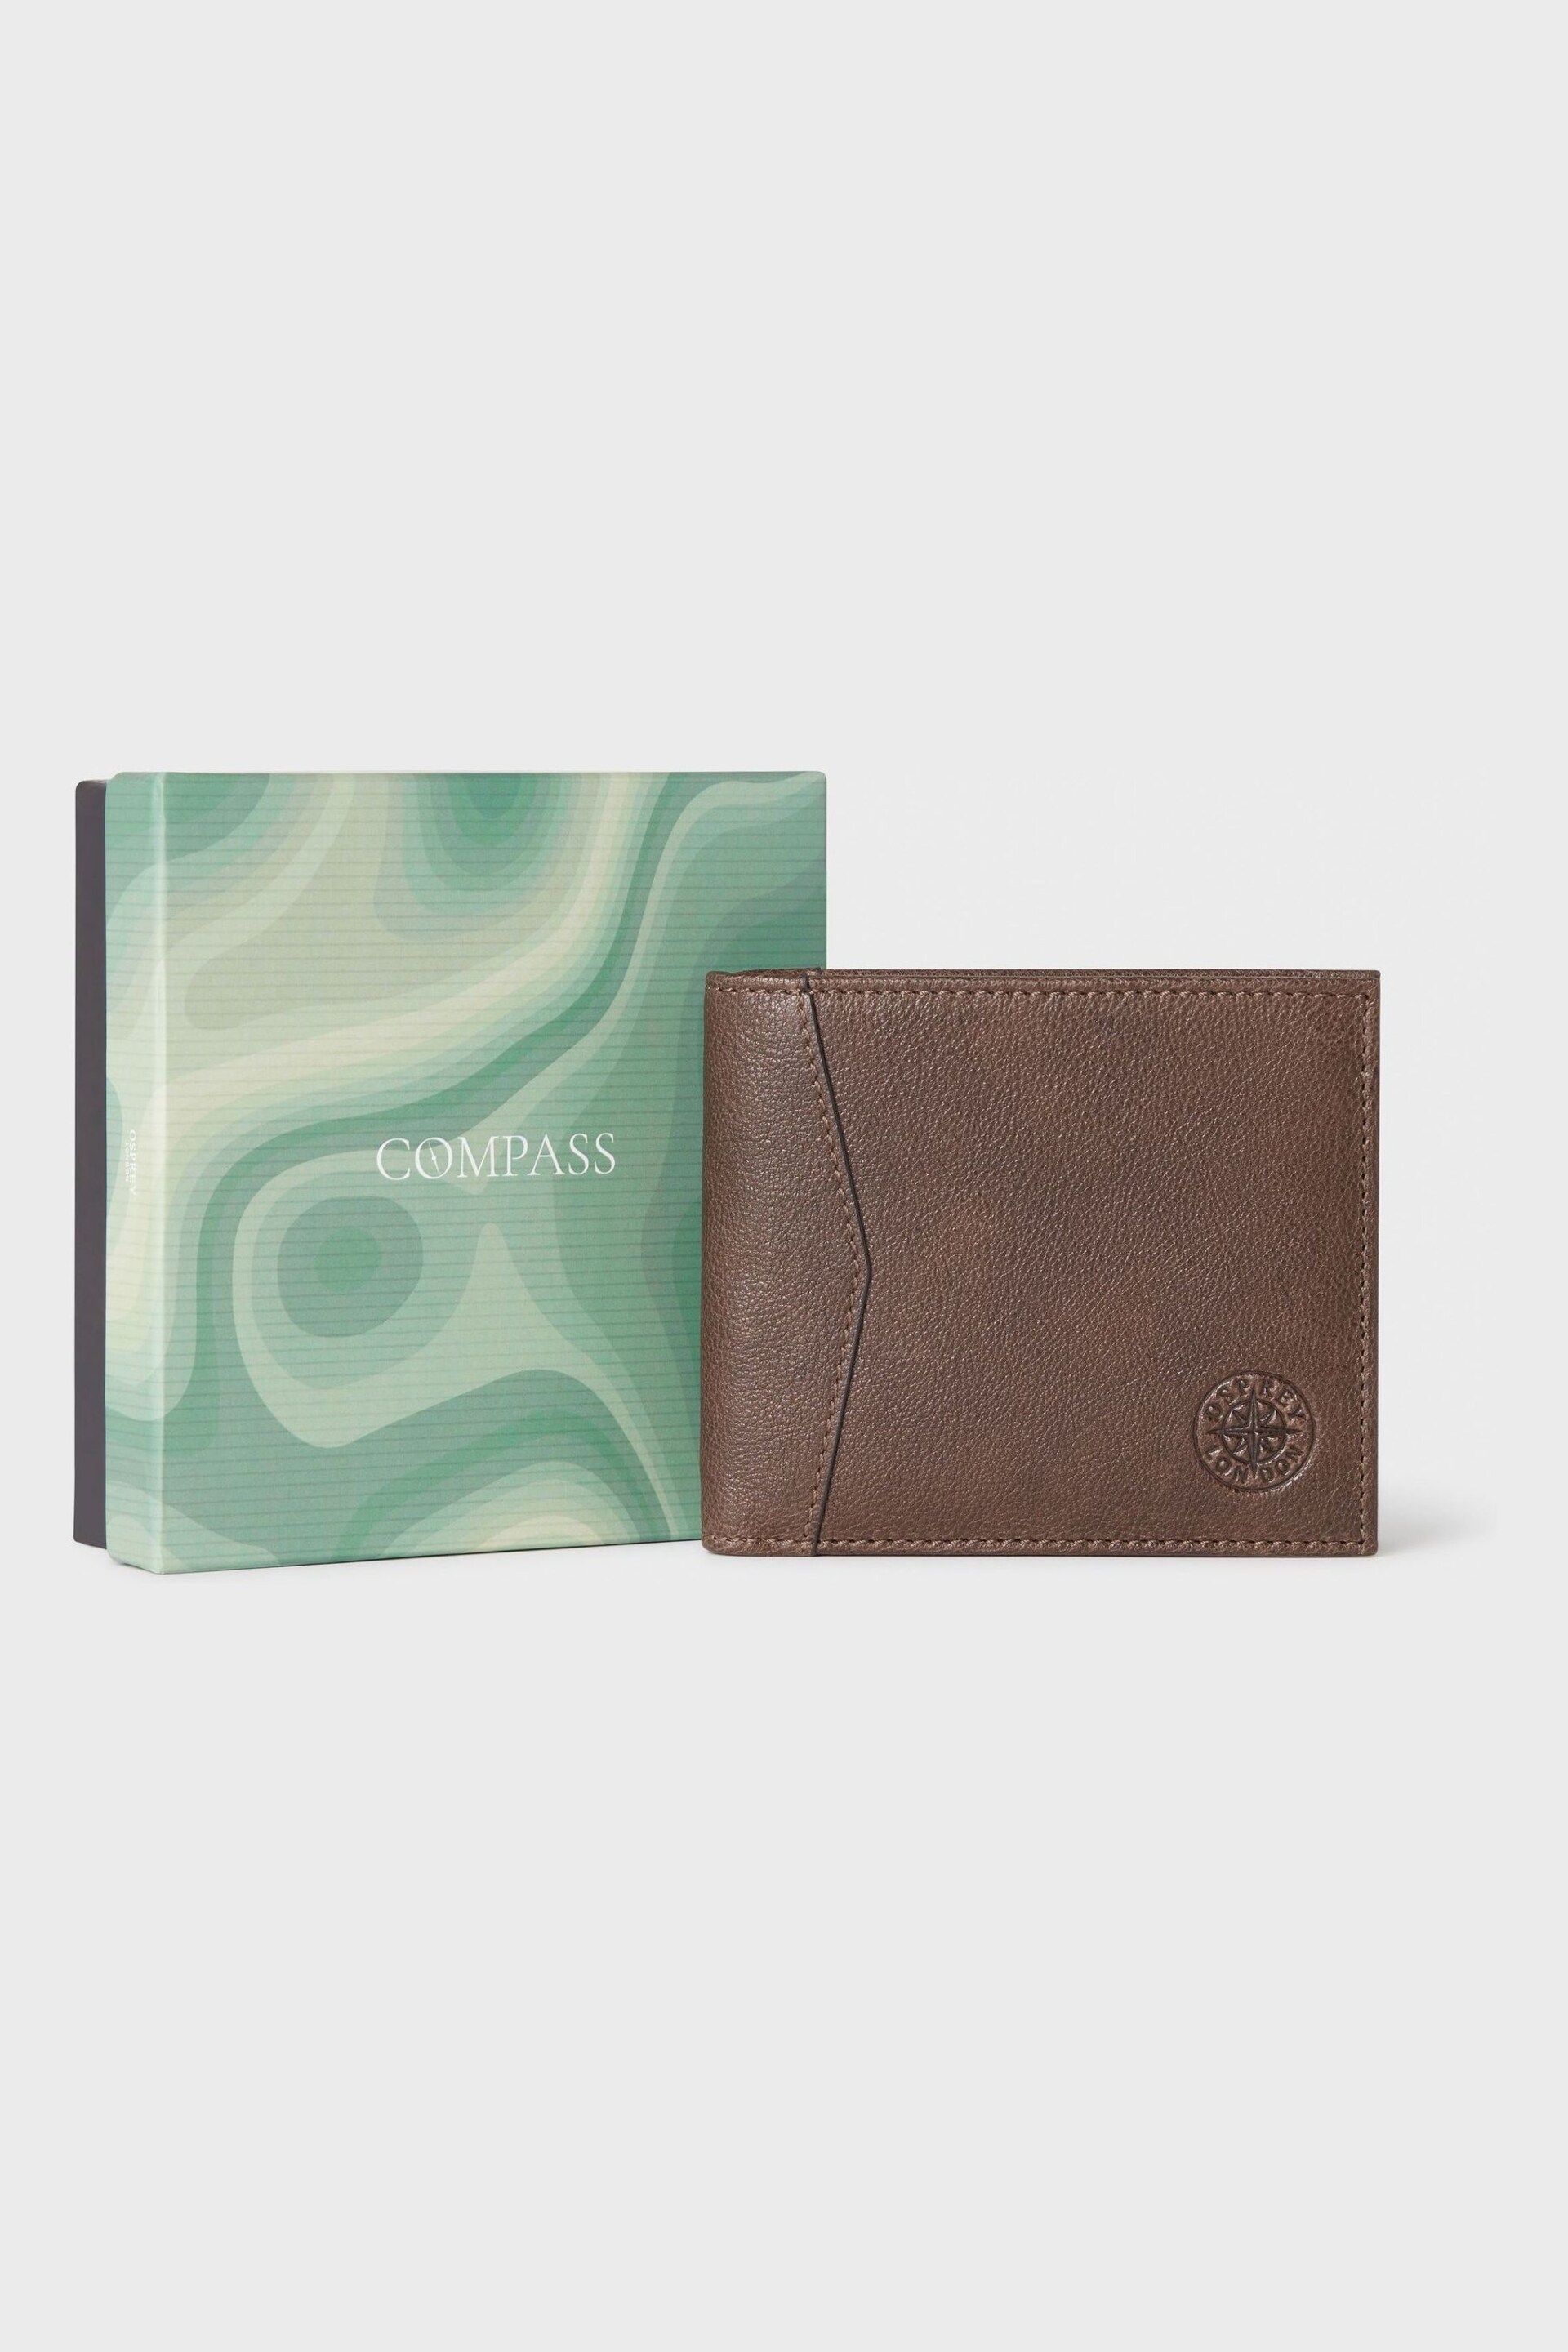 Osprey London The Compass Leather Card Brown Wallet - Image 1 of 5